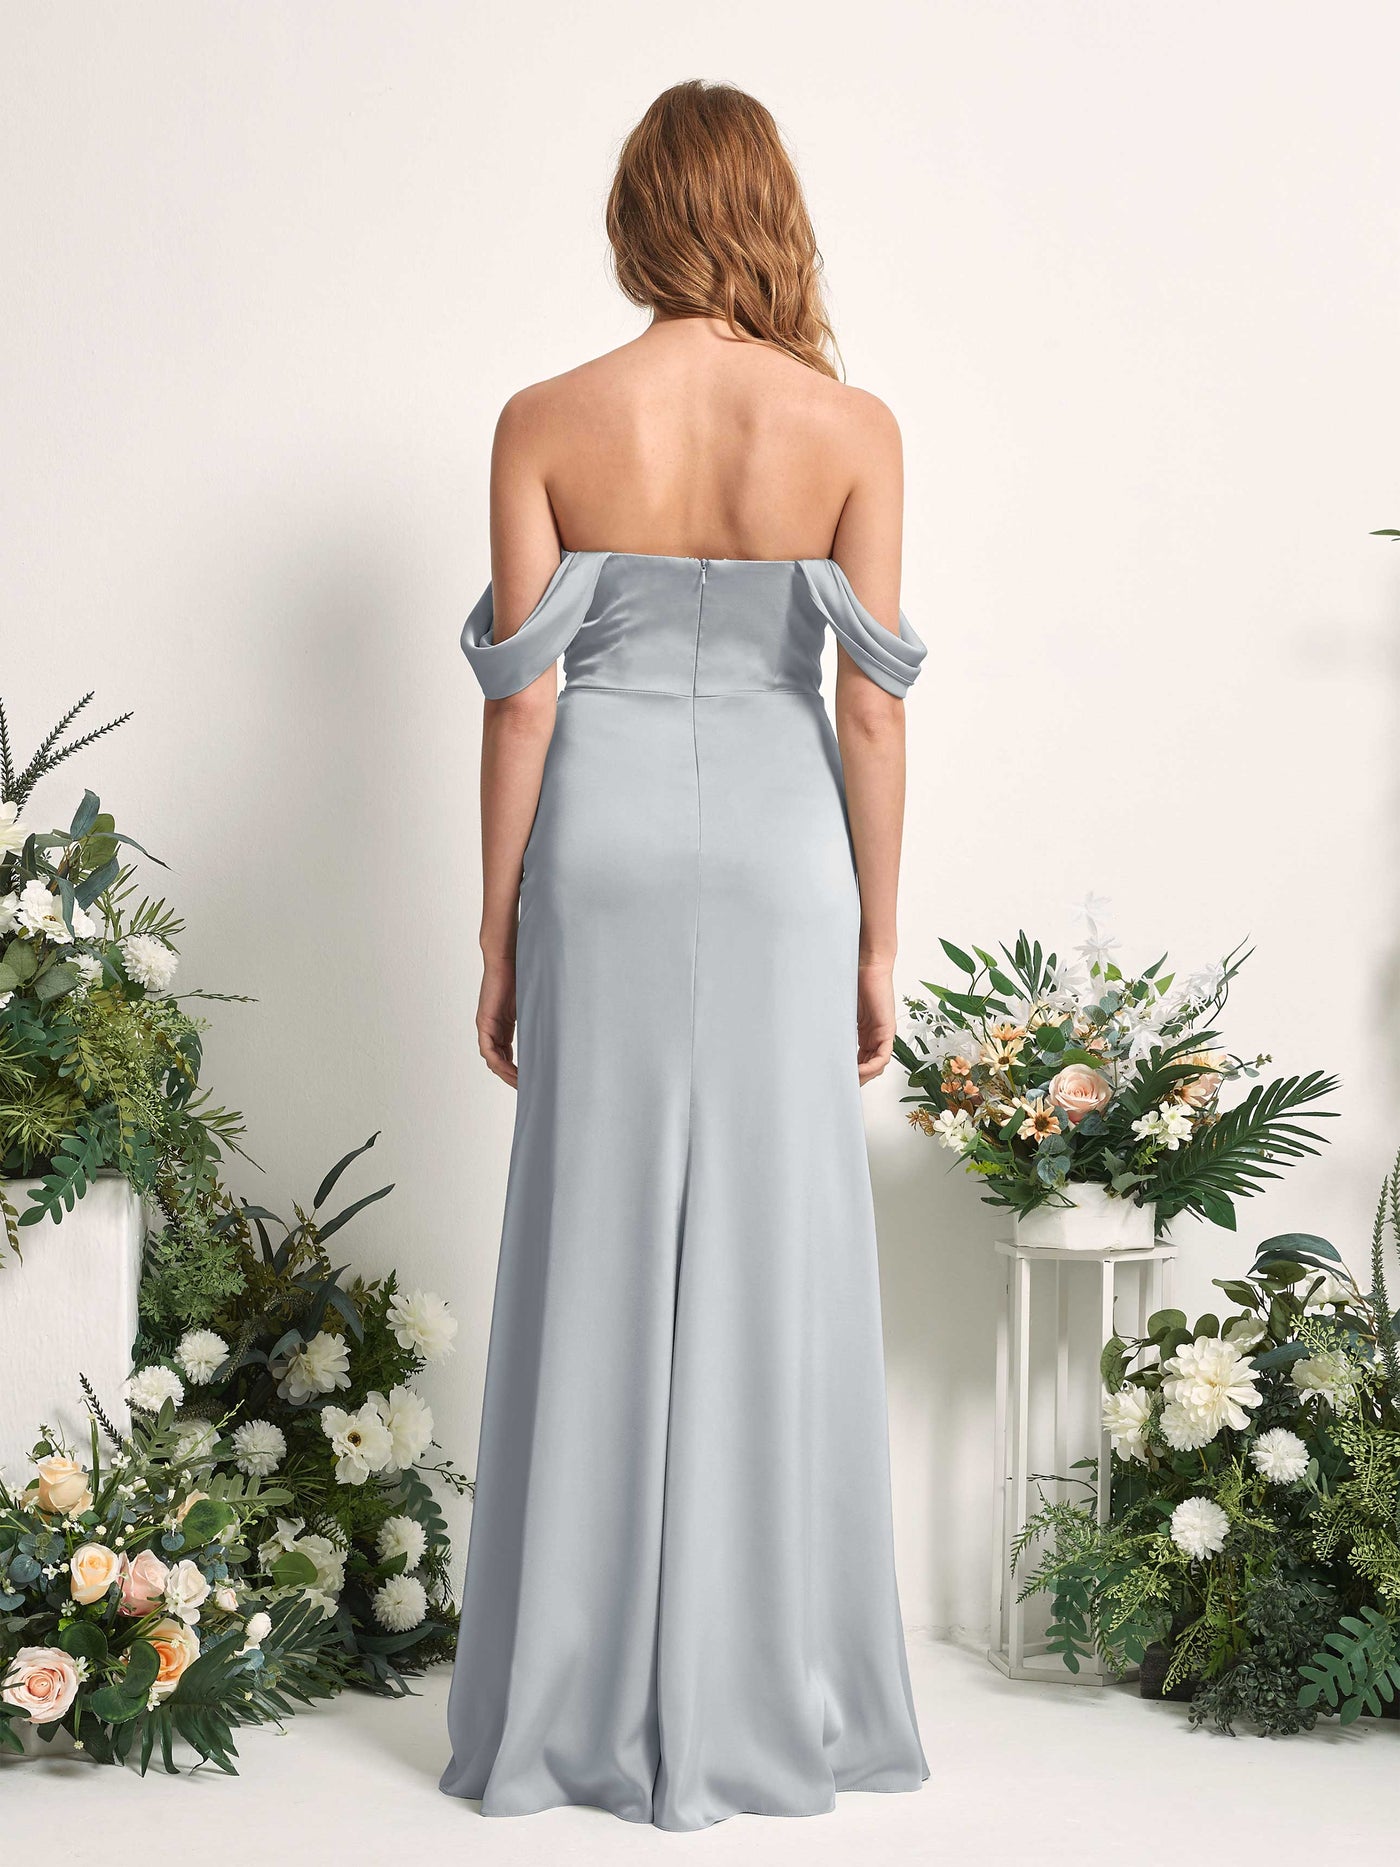 Baby Blue Bridesmaid Dresses Bridesmaid Dress A-line Satin Off Shoulder Full Length Sleeveless Wedding Party Dress (80225201)#color_baby-blue